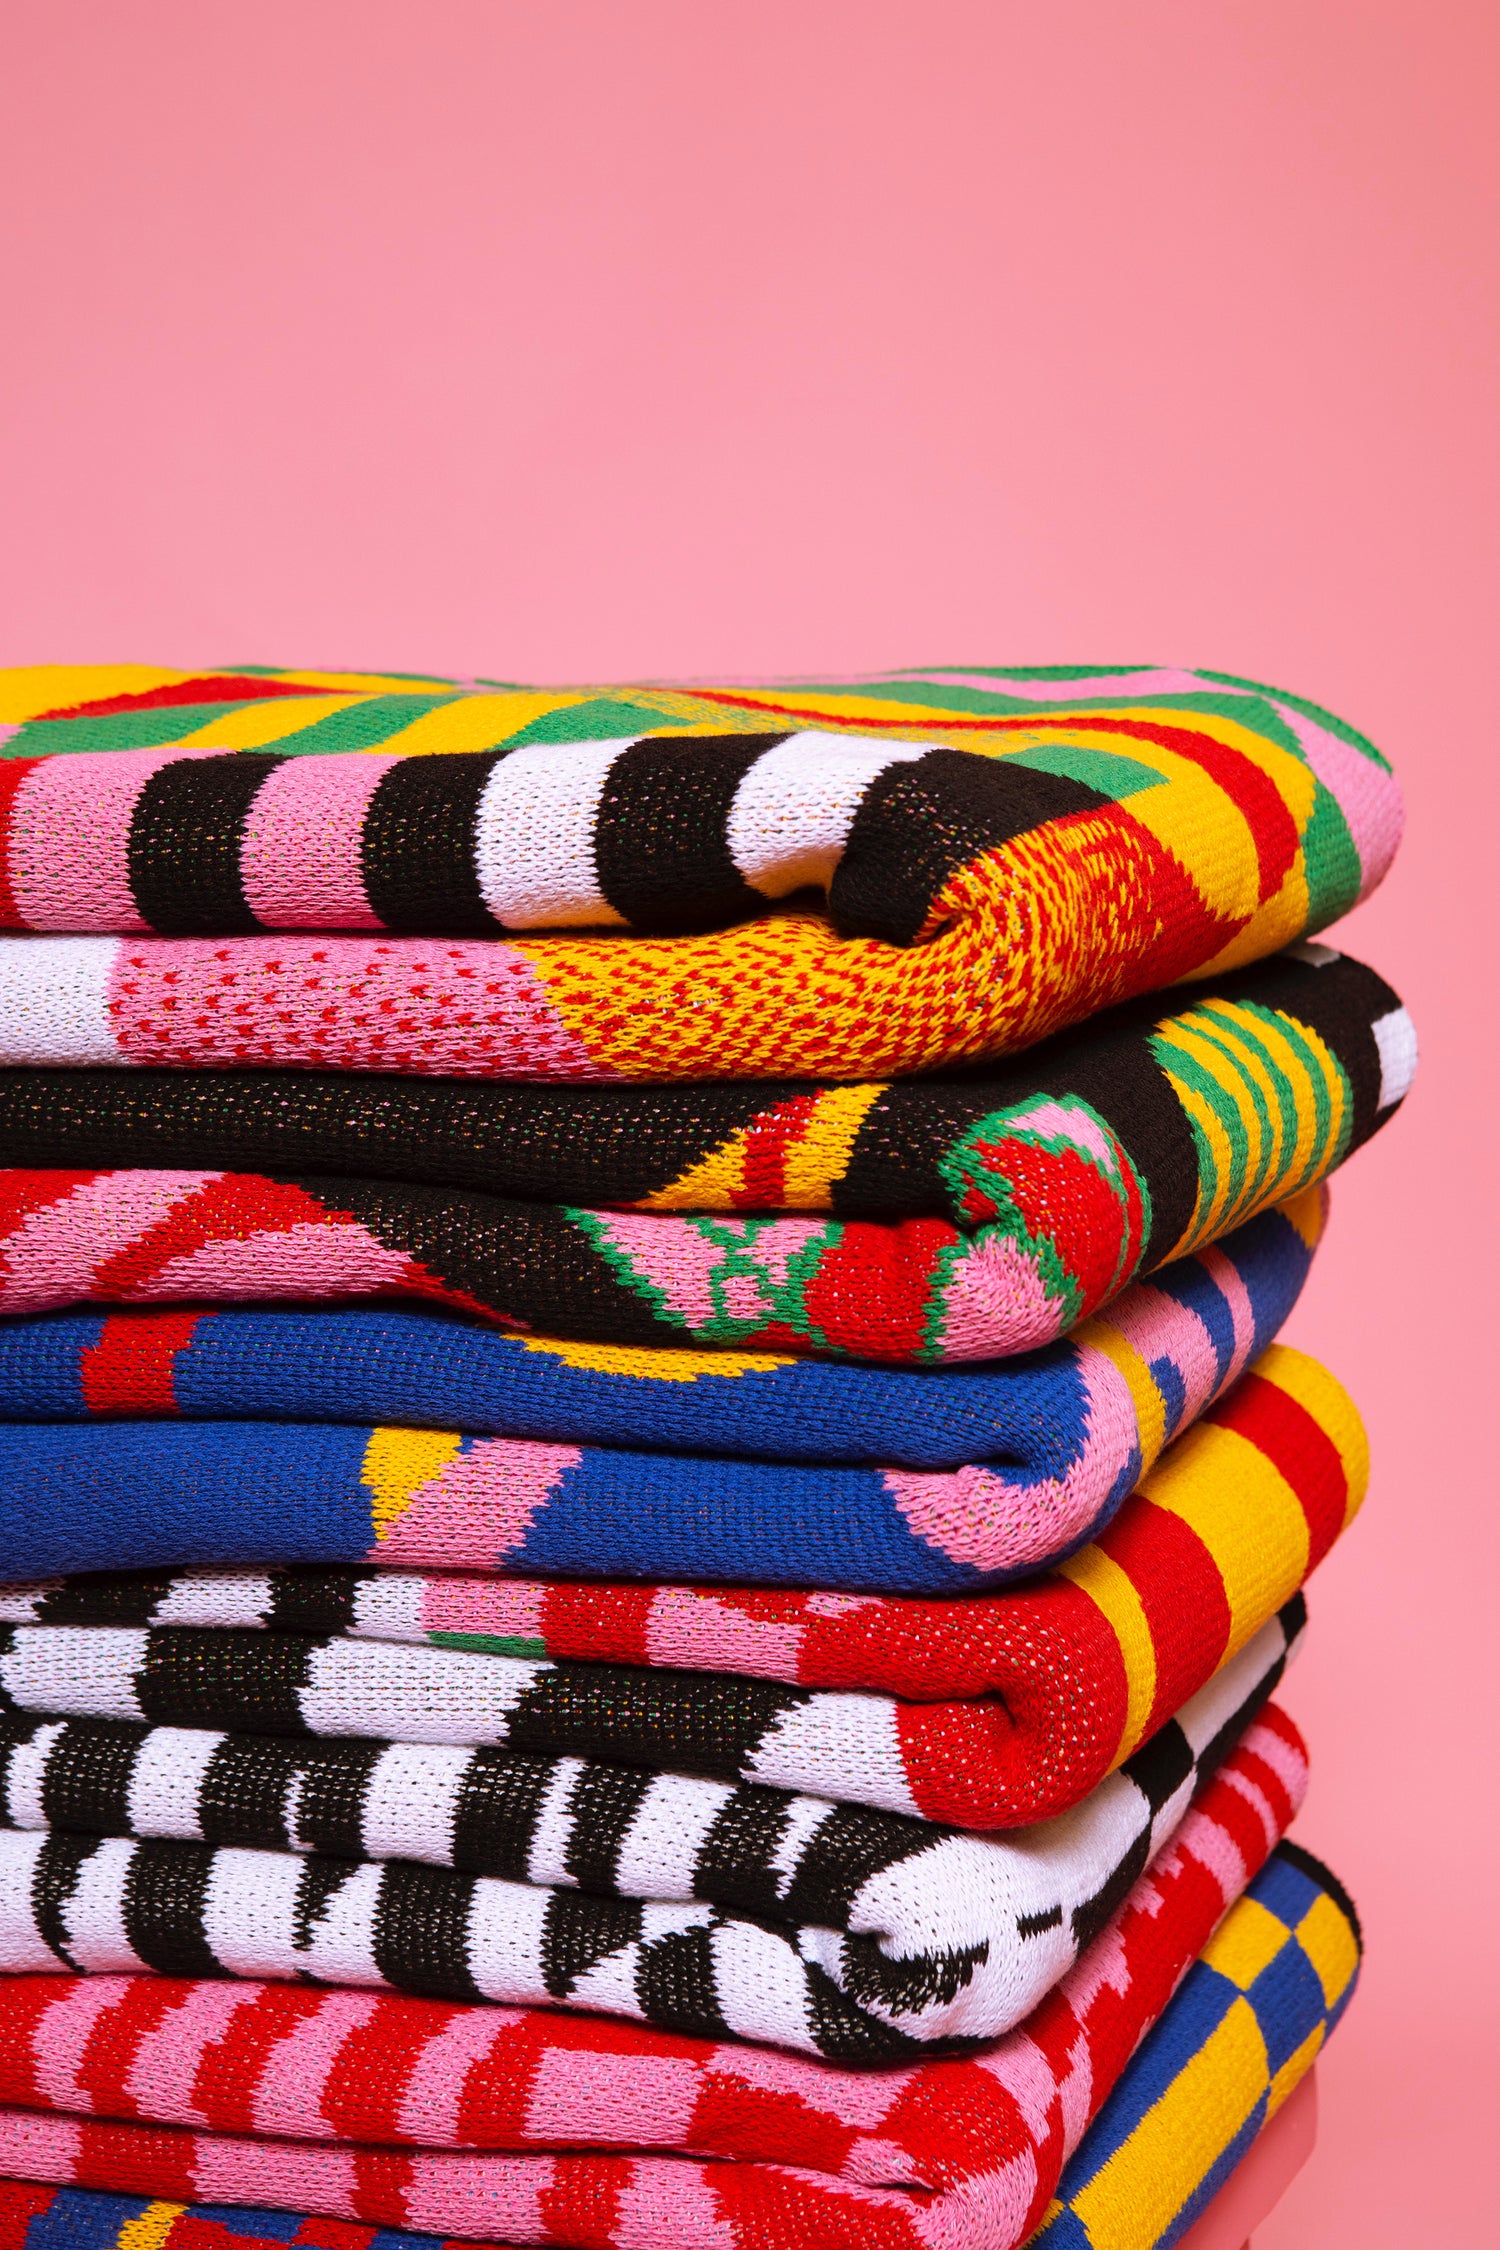 The Gradient Stripe Blanket shown on a stack of blankets against a pink ground. This stack is 7 blankets high.